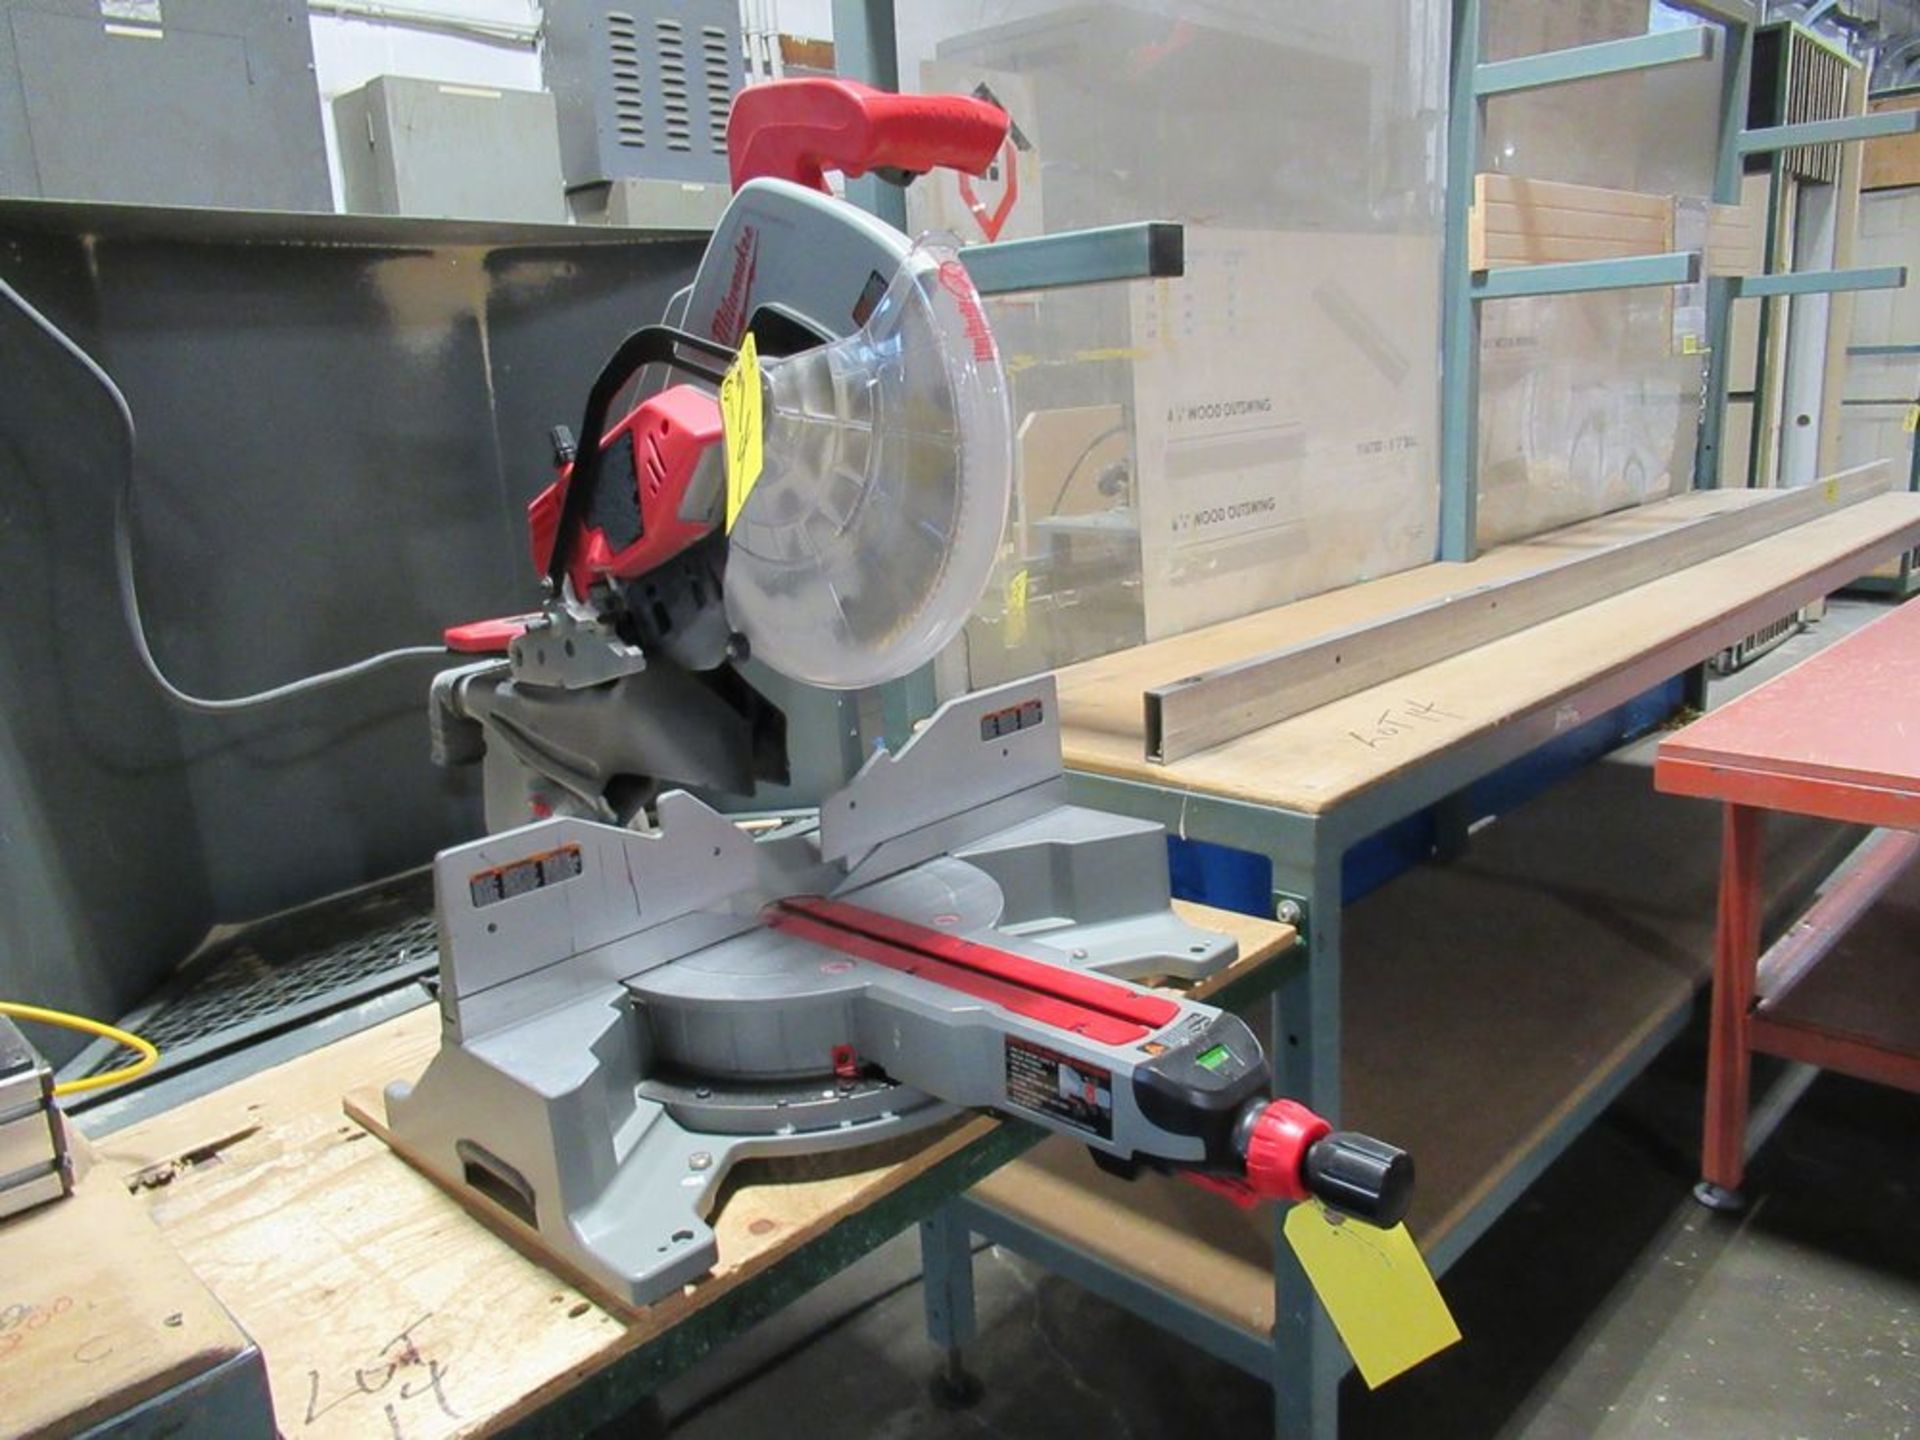 MILWAUKEE CAT# 6955-20 HD 12" COMPOUND SLIDING MITRE SAW, S/N B26-B917410381 W/ 24" X 10' TABLE - Image 2 of 4